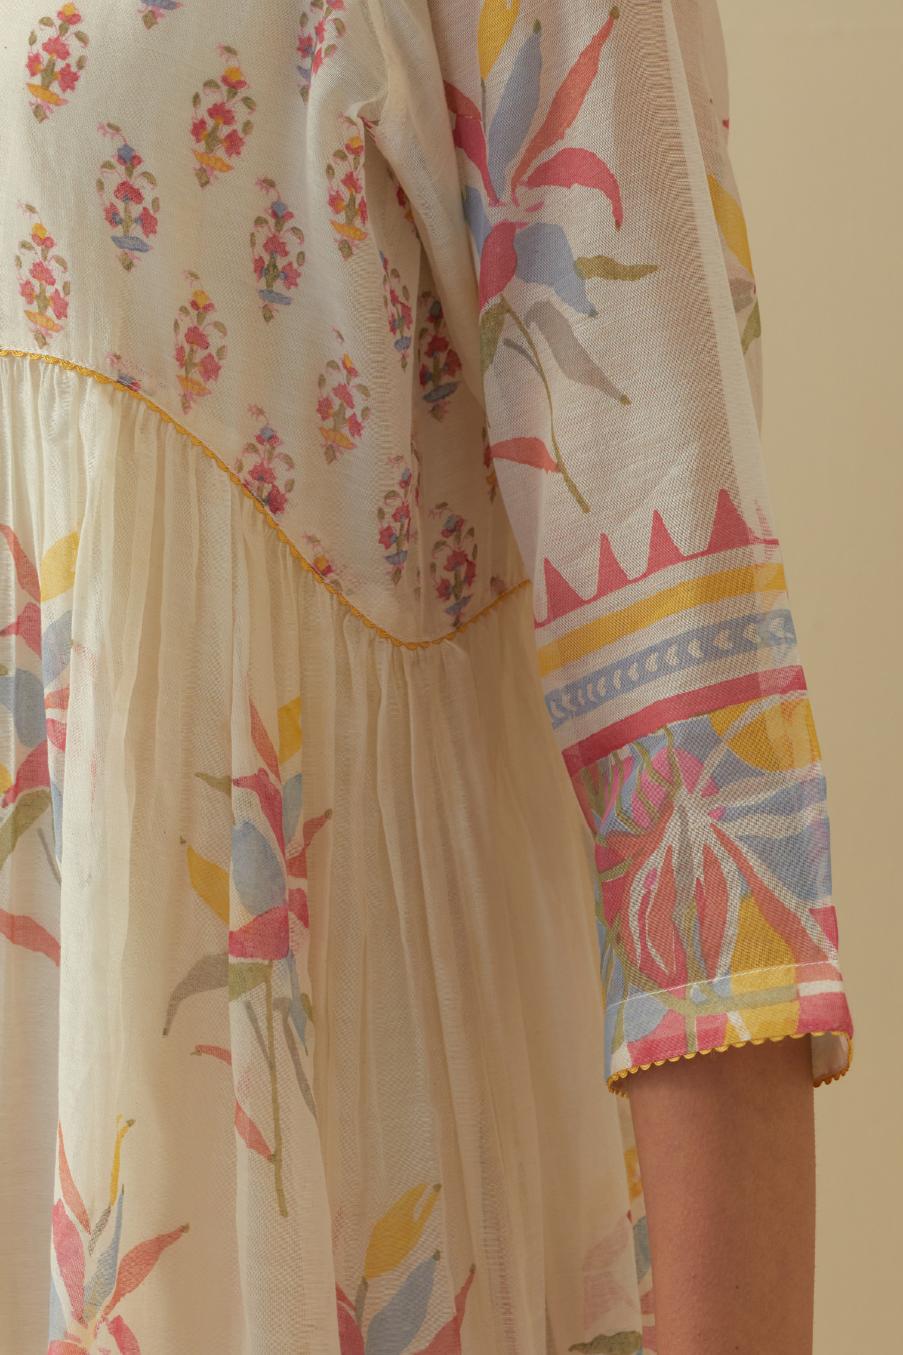 Off white cotton chanderi Kurta dress set with all-over assorted multi colored floral hand block print.